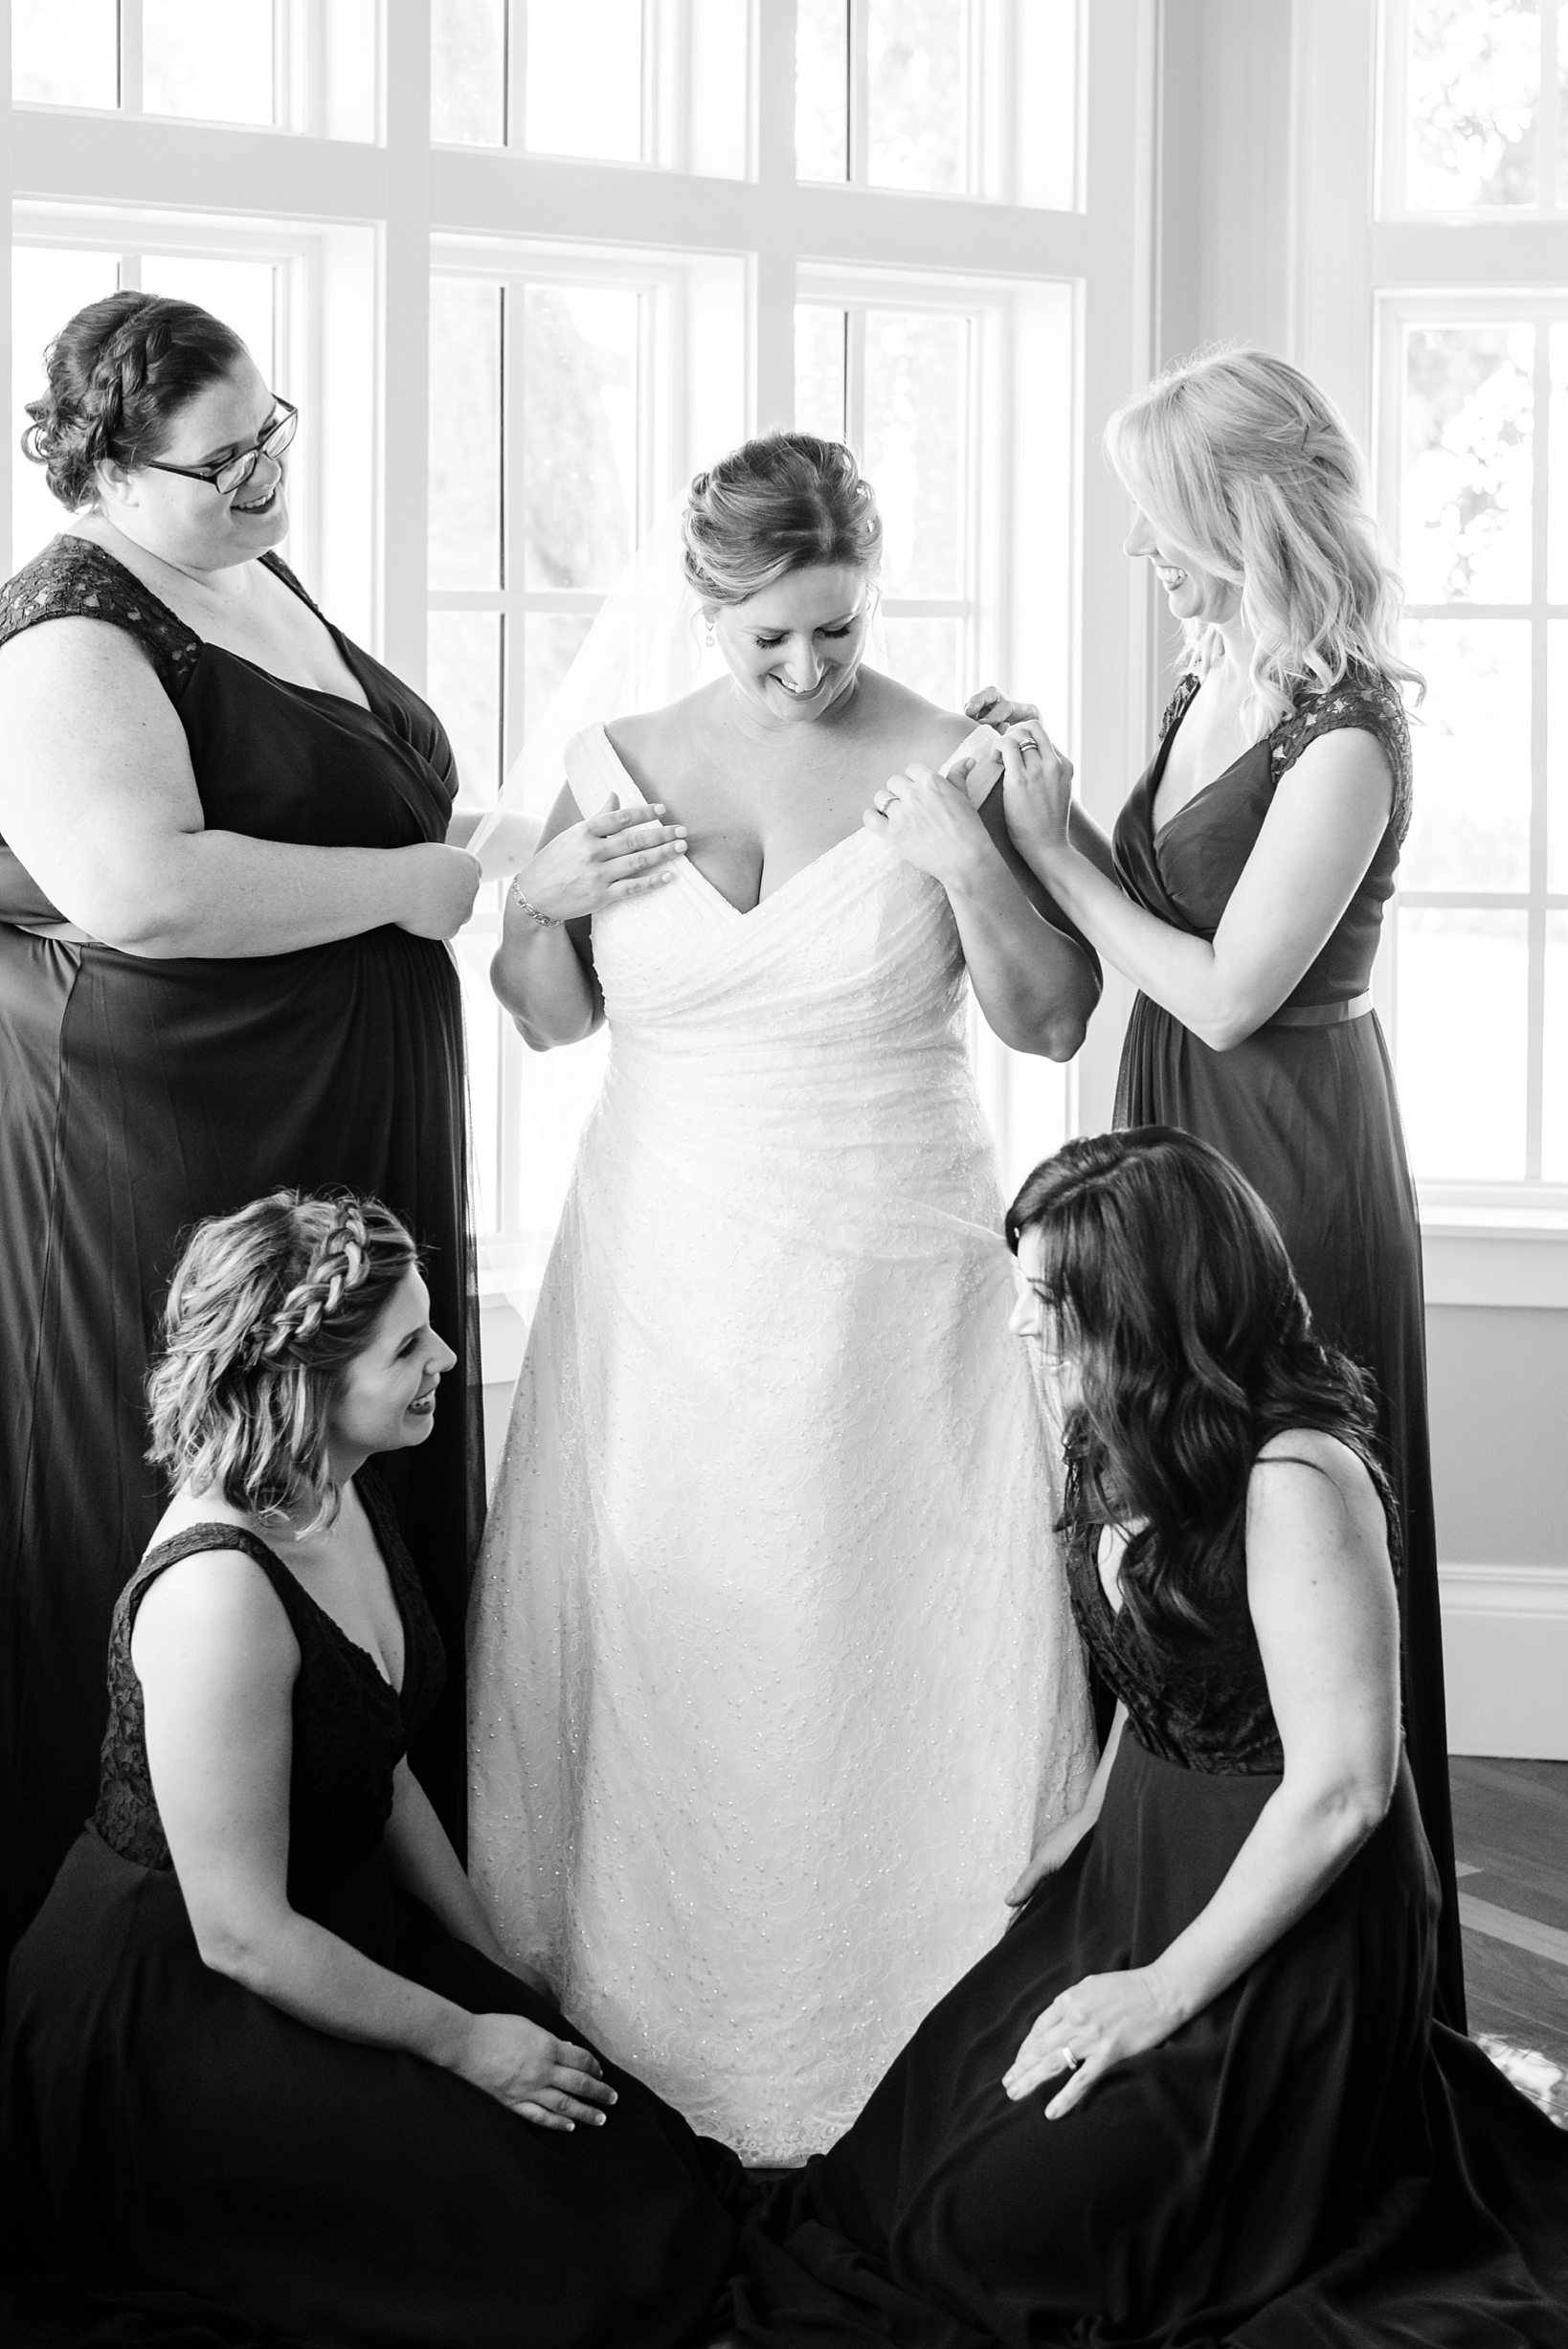 Classic image of a bride and her bridesmaids helping get her ready for the wedding